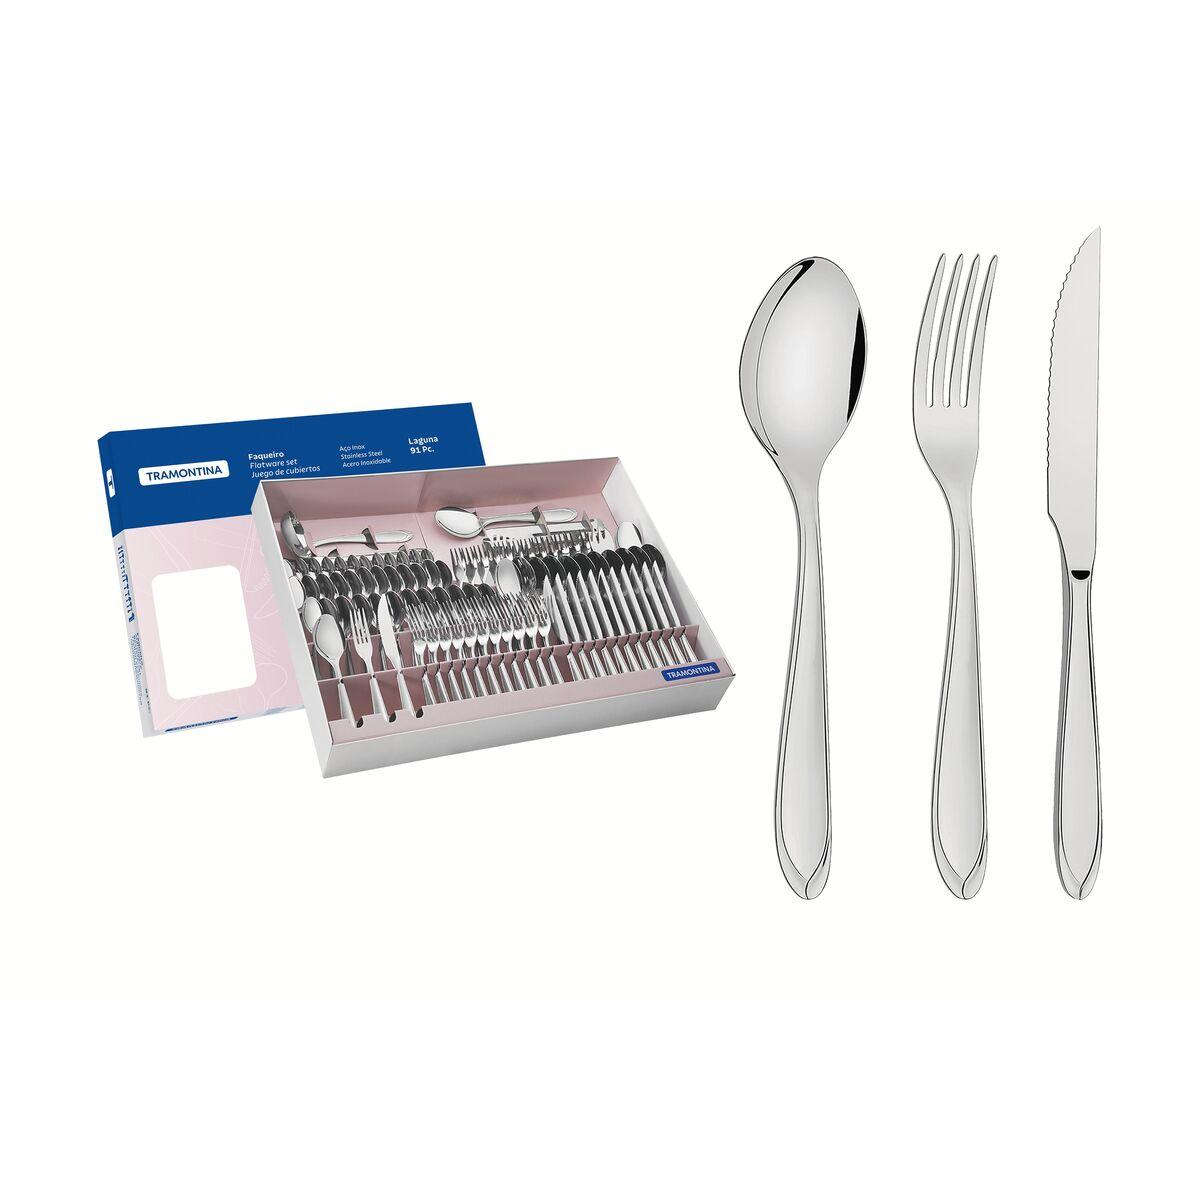 Tramontina Laguna stainless steel flatware set with steak knives, mirror finish and detailing on the handles, 91 pc set